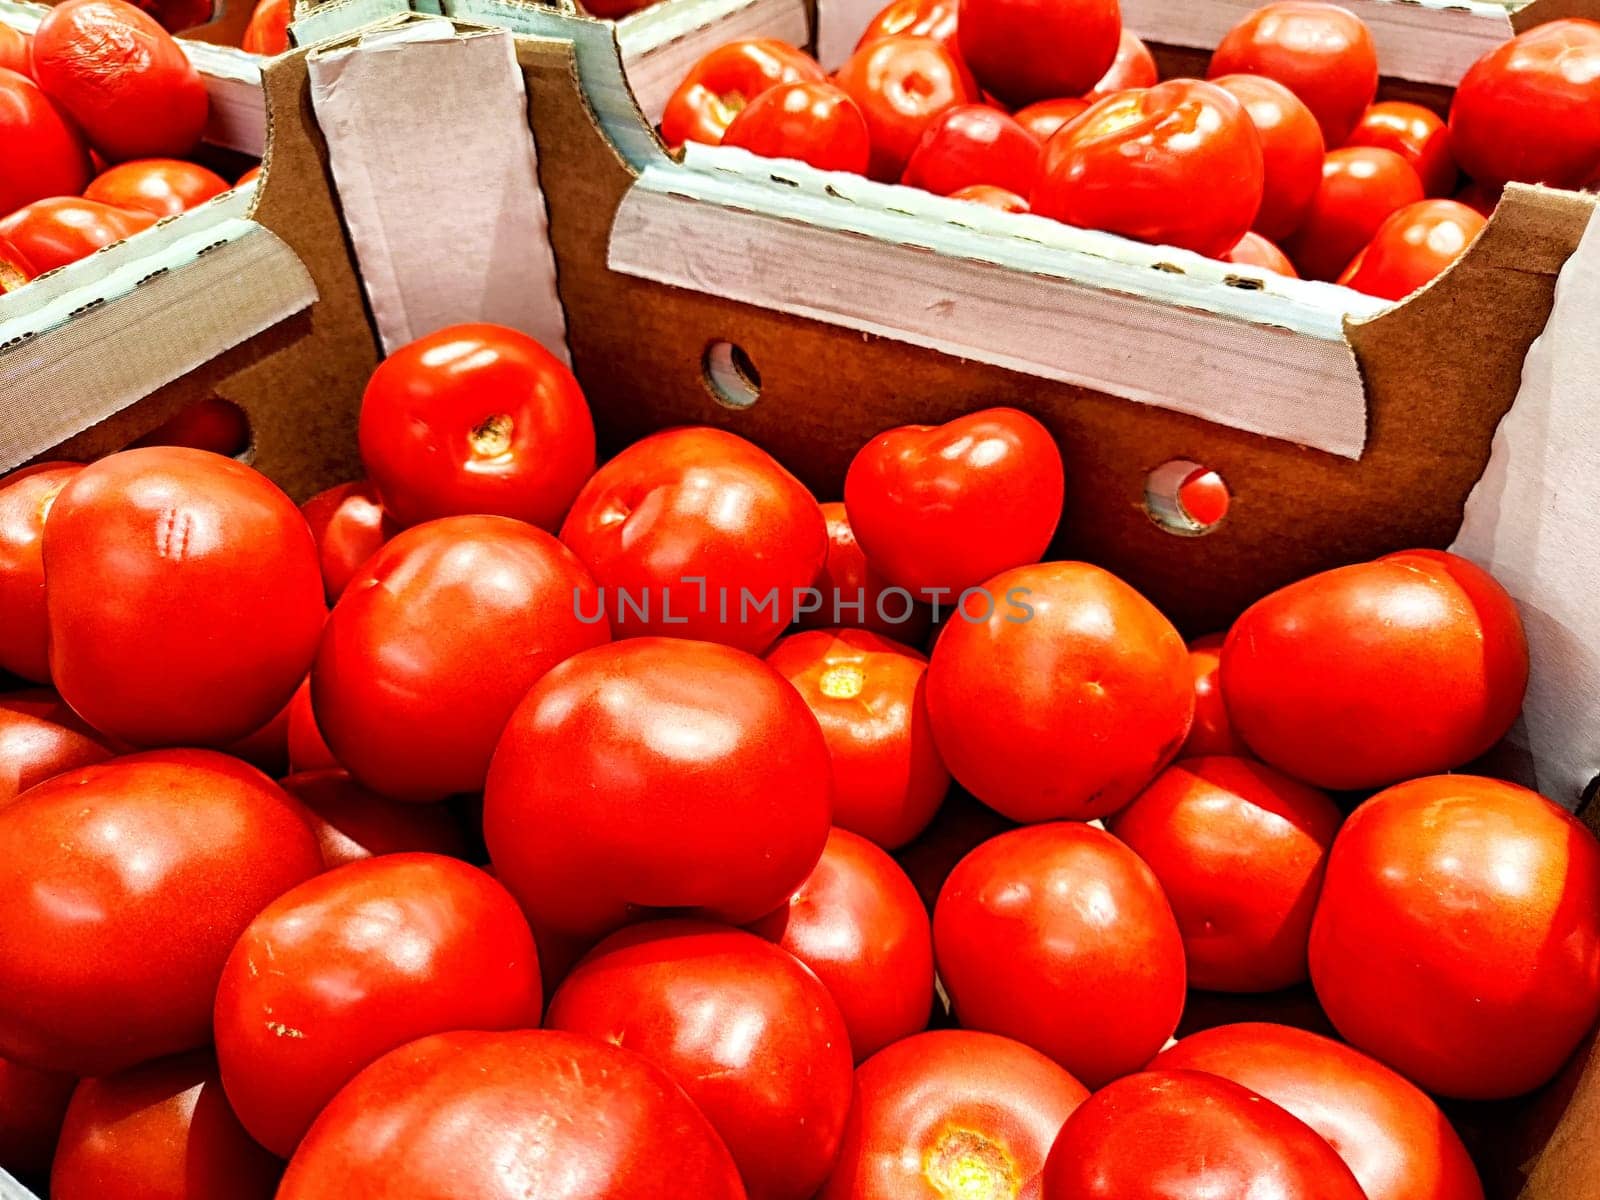 Red ripe tomatoes in cardboard boxes. Fresh Tomatoes Displayed for Sale at a Local Market by keleny